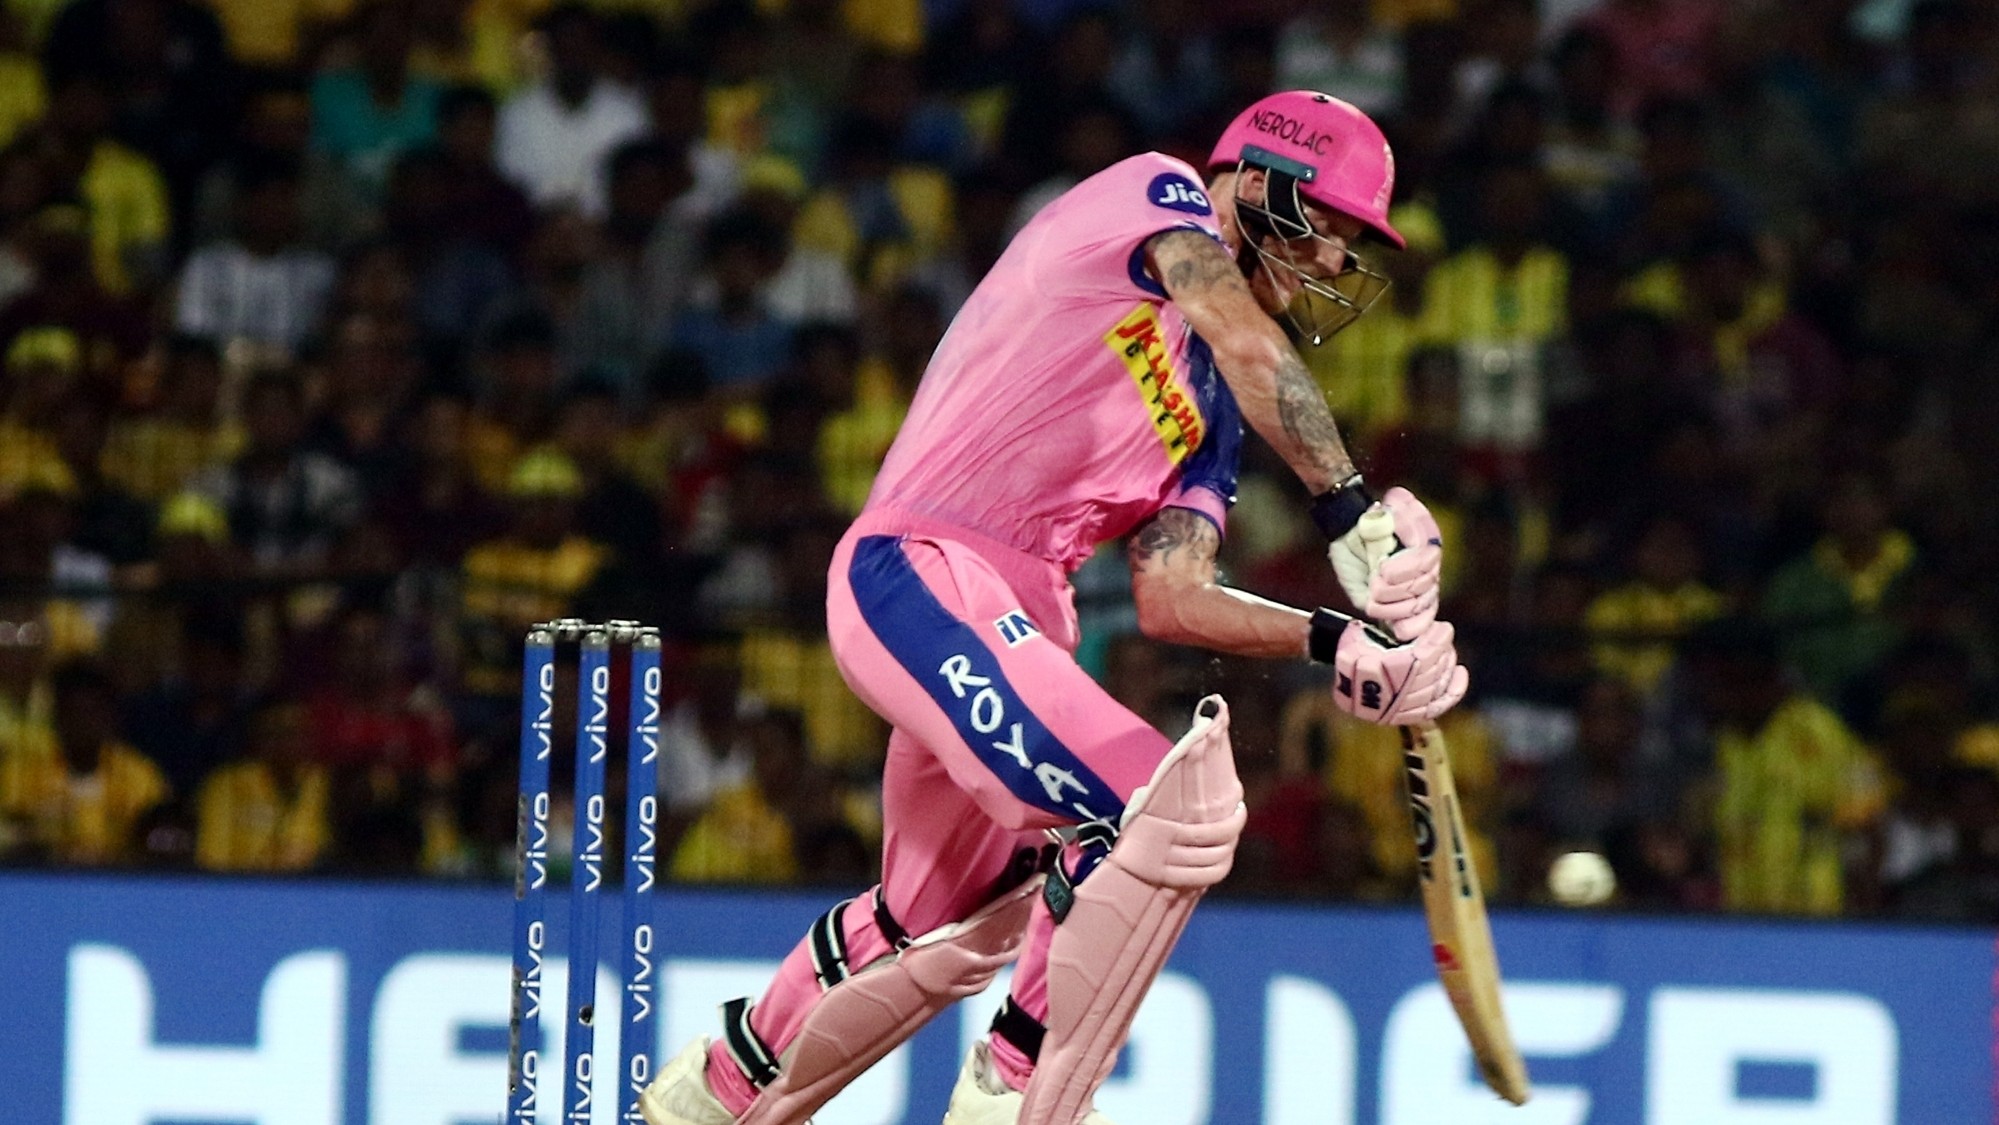 IPL 2020: Ben Stokes doubtful for IPL 13 in UAE after opting out of Australia series